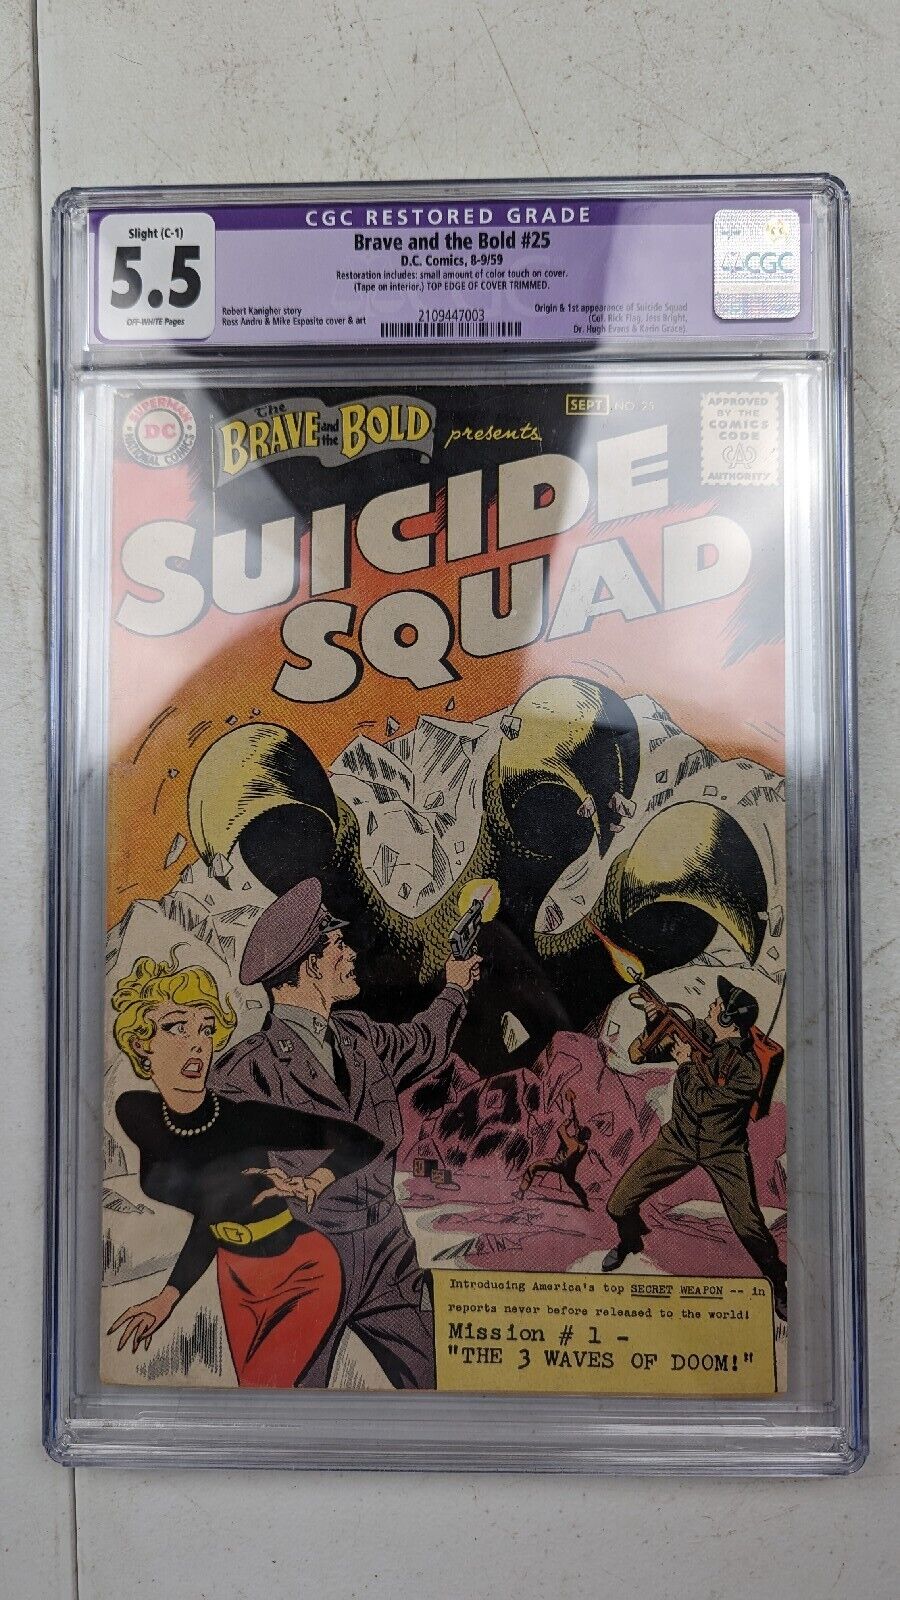 1959 DC COMICS BRAVE AND THE BOLD #25 1ST SUICIDE SQUAD CGC GRADED 5.5 RESTORED